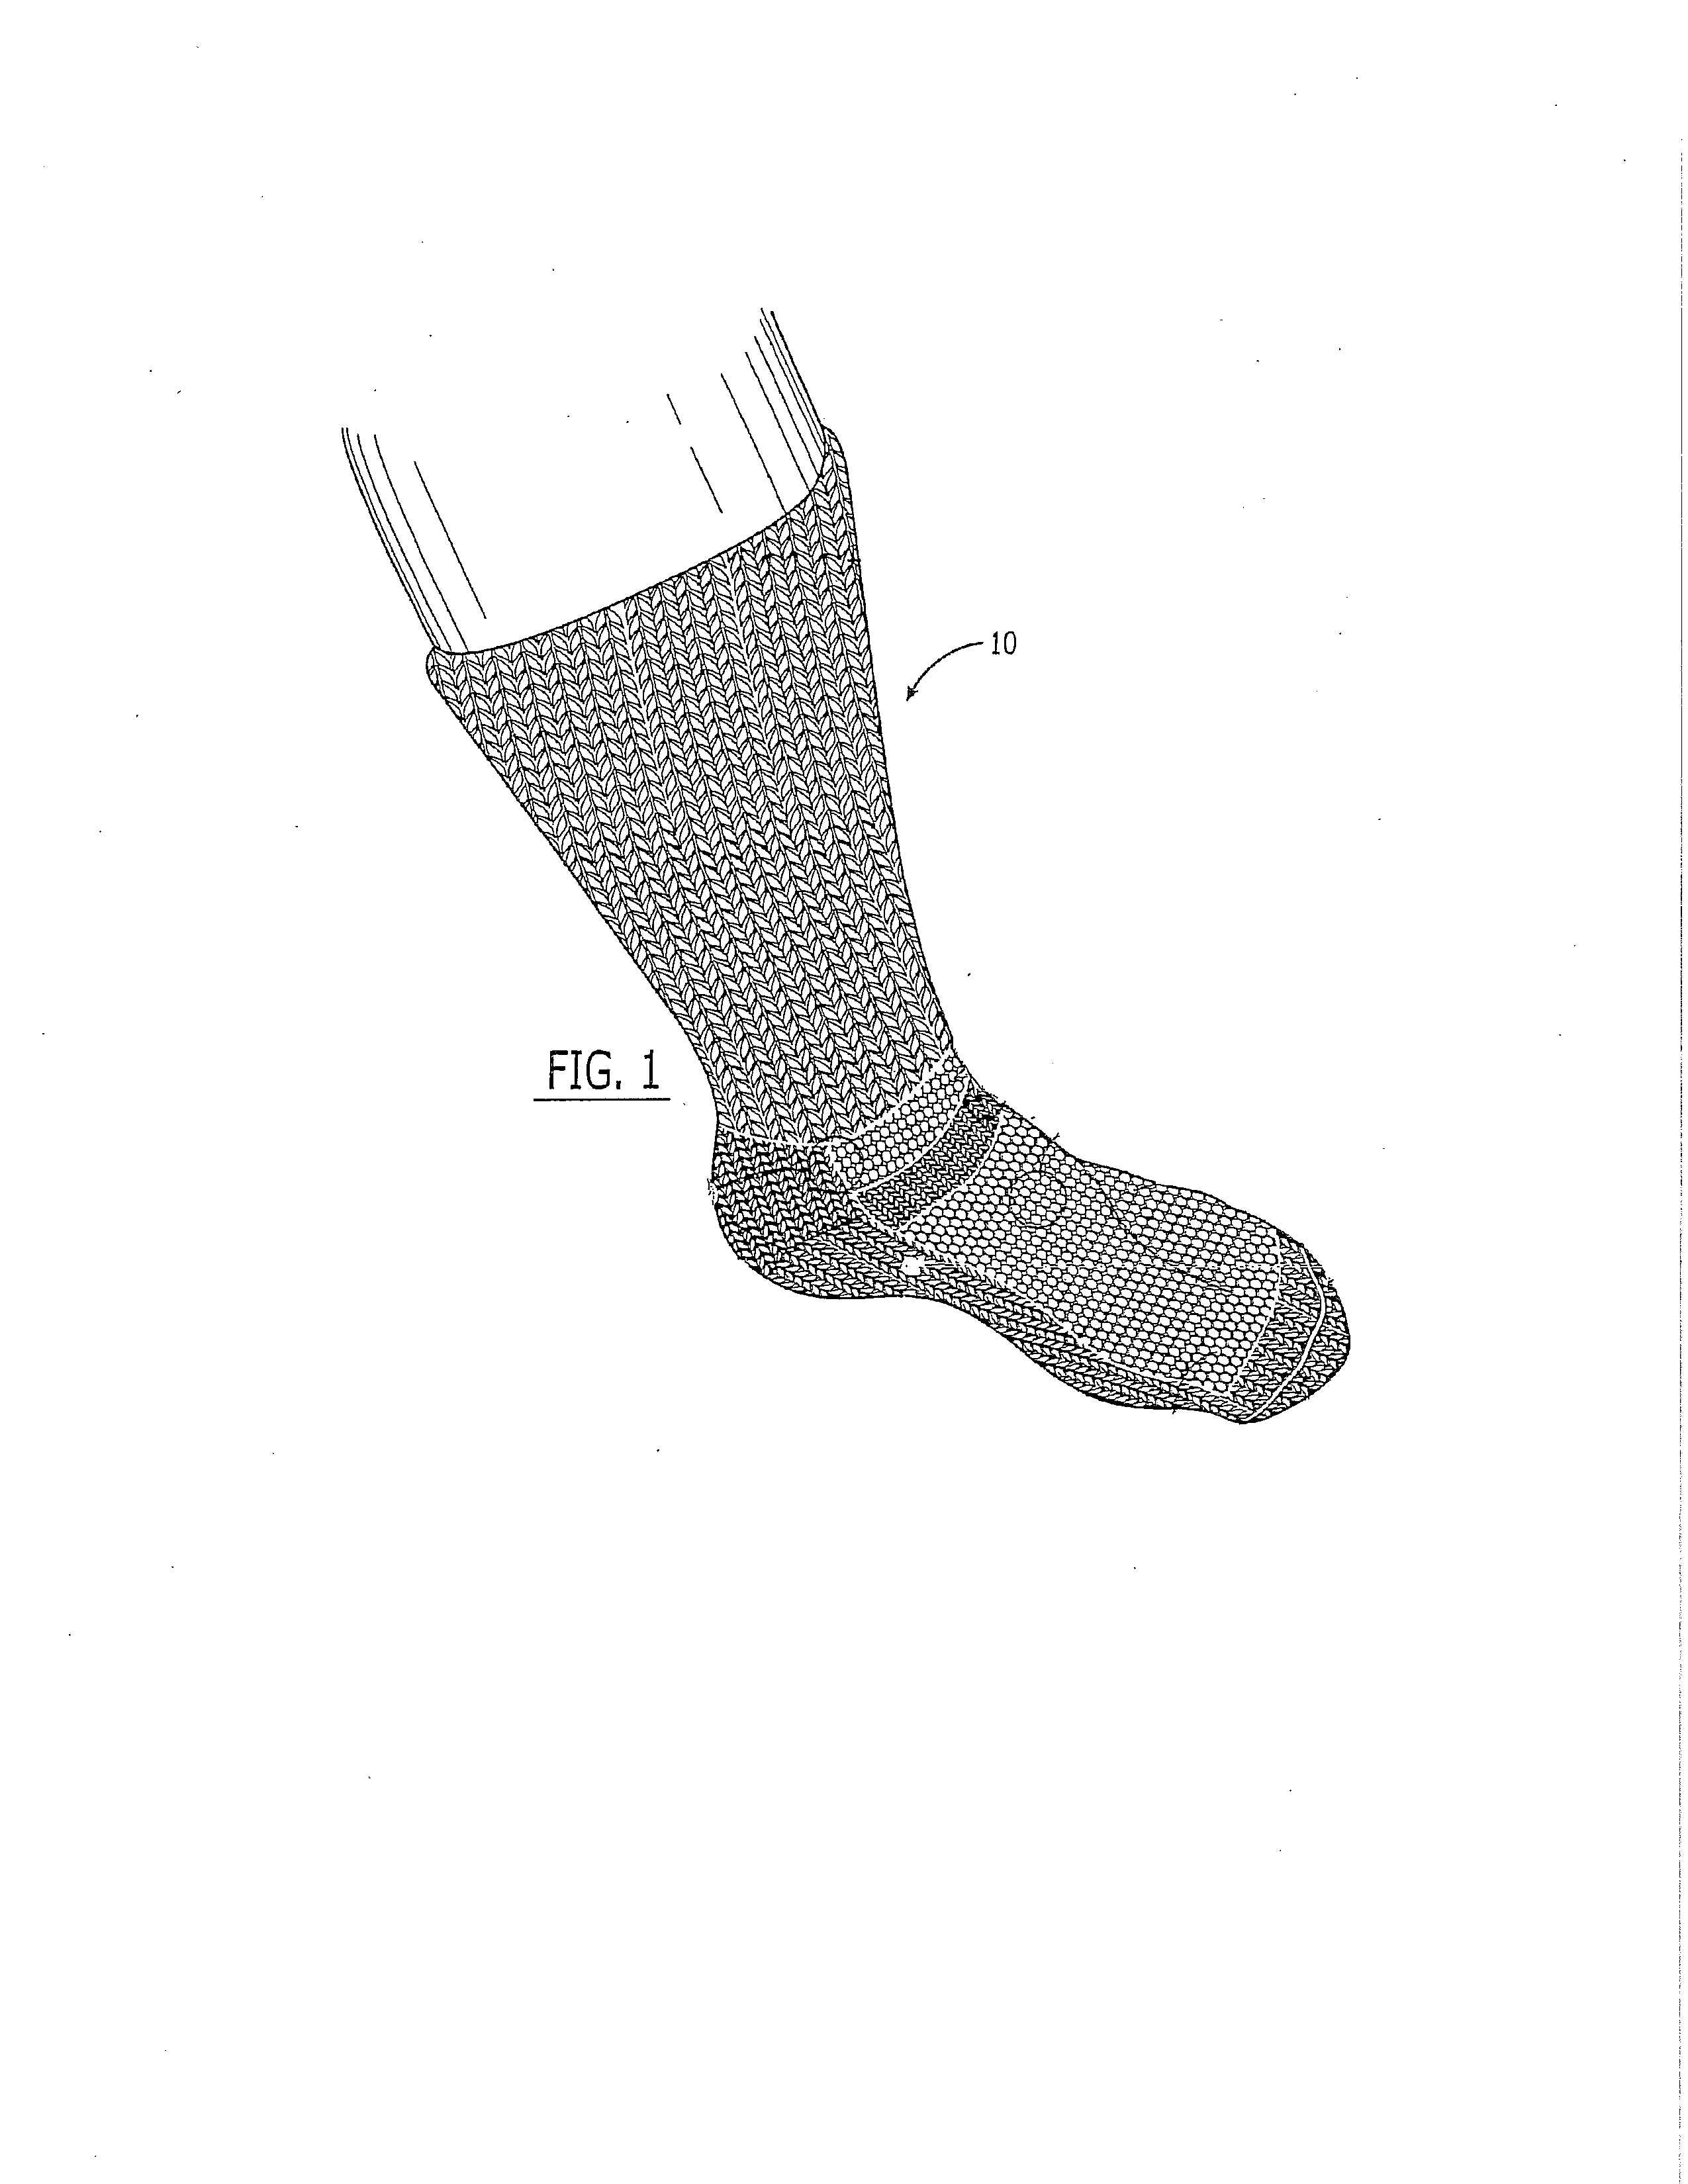 Sock for treatment of foot and leg wounds, methods of use and manufacture